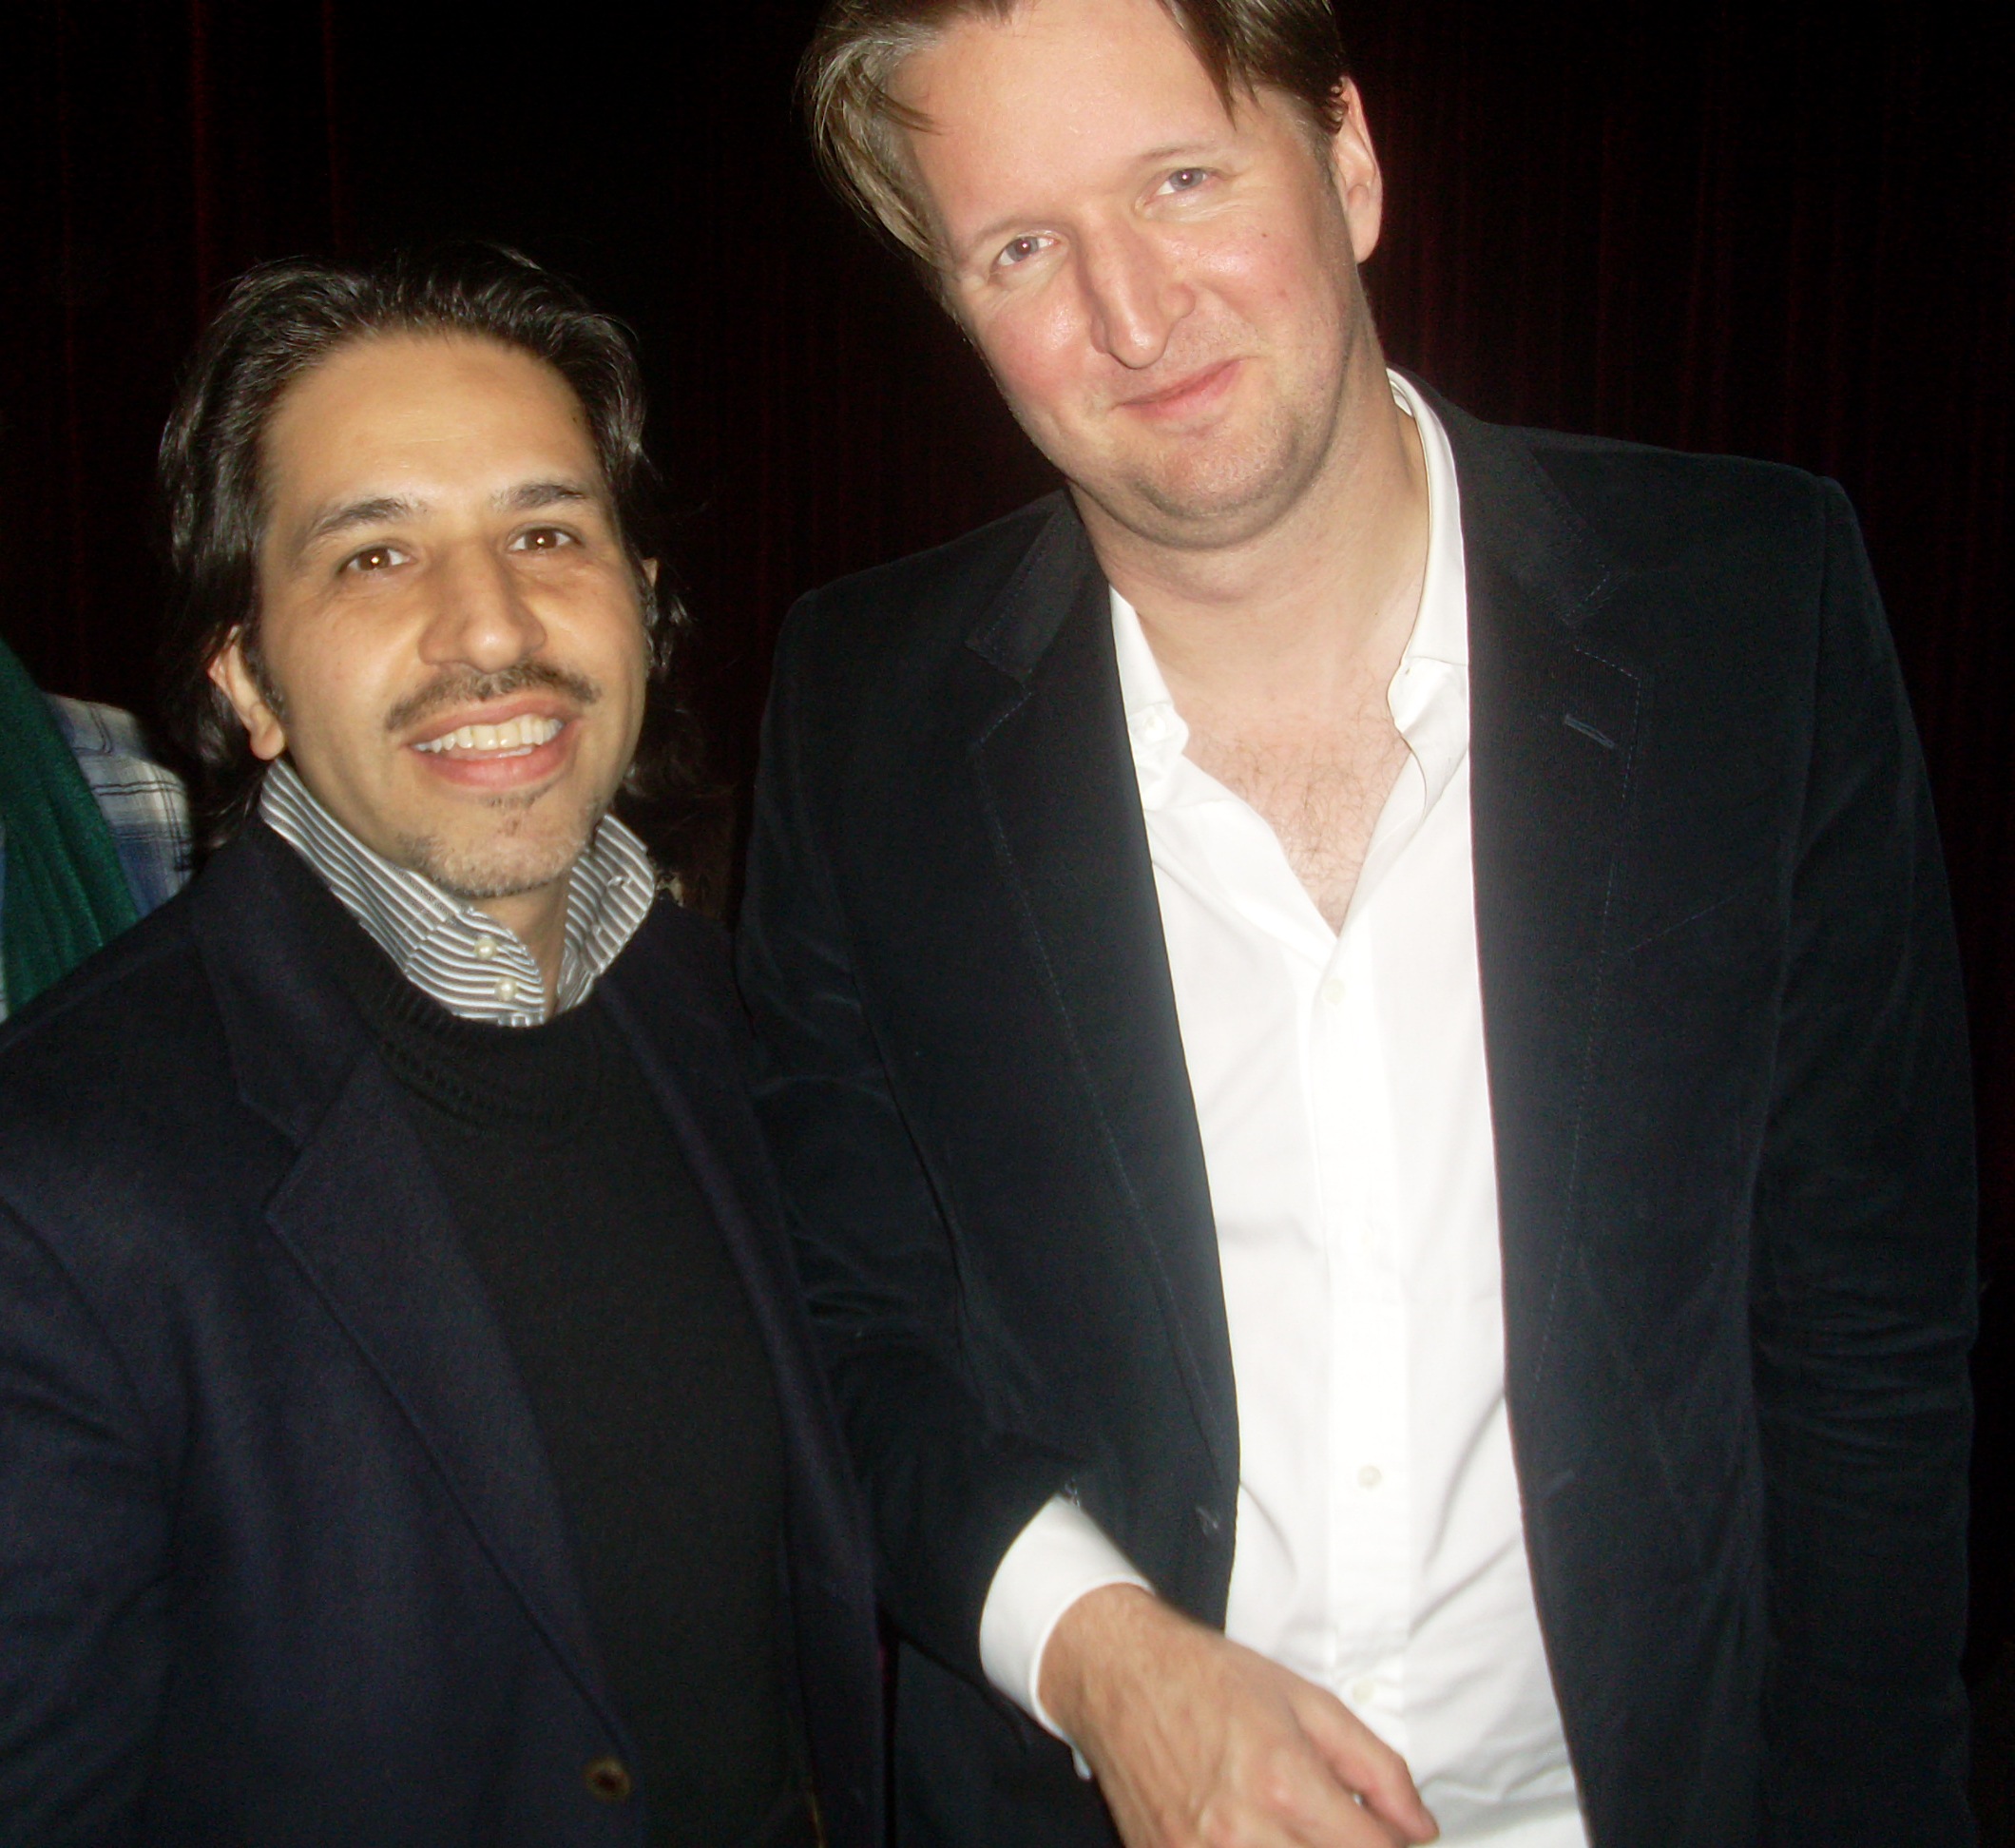 With Tom Hooper